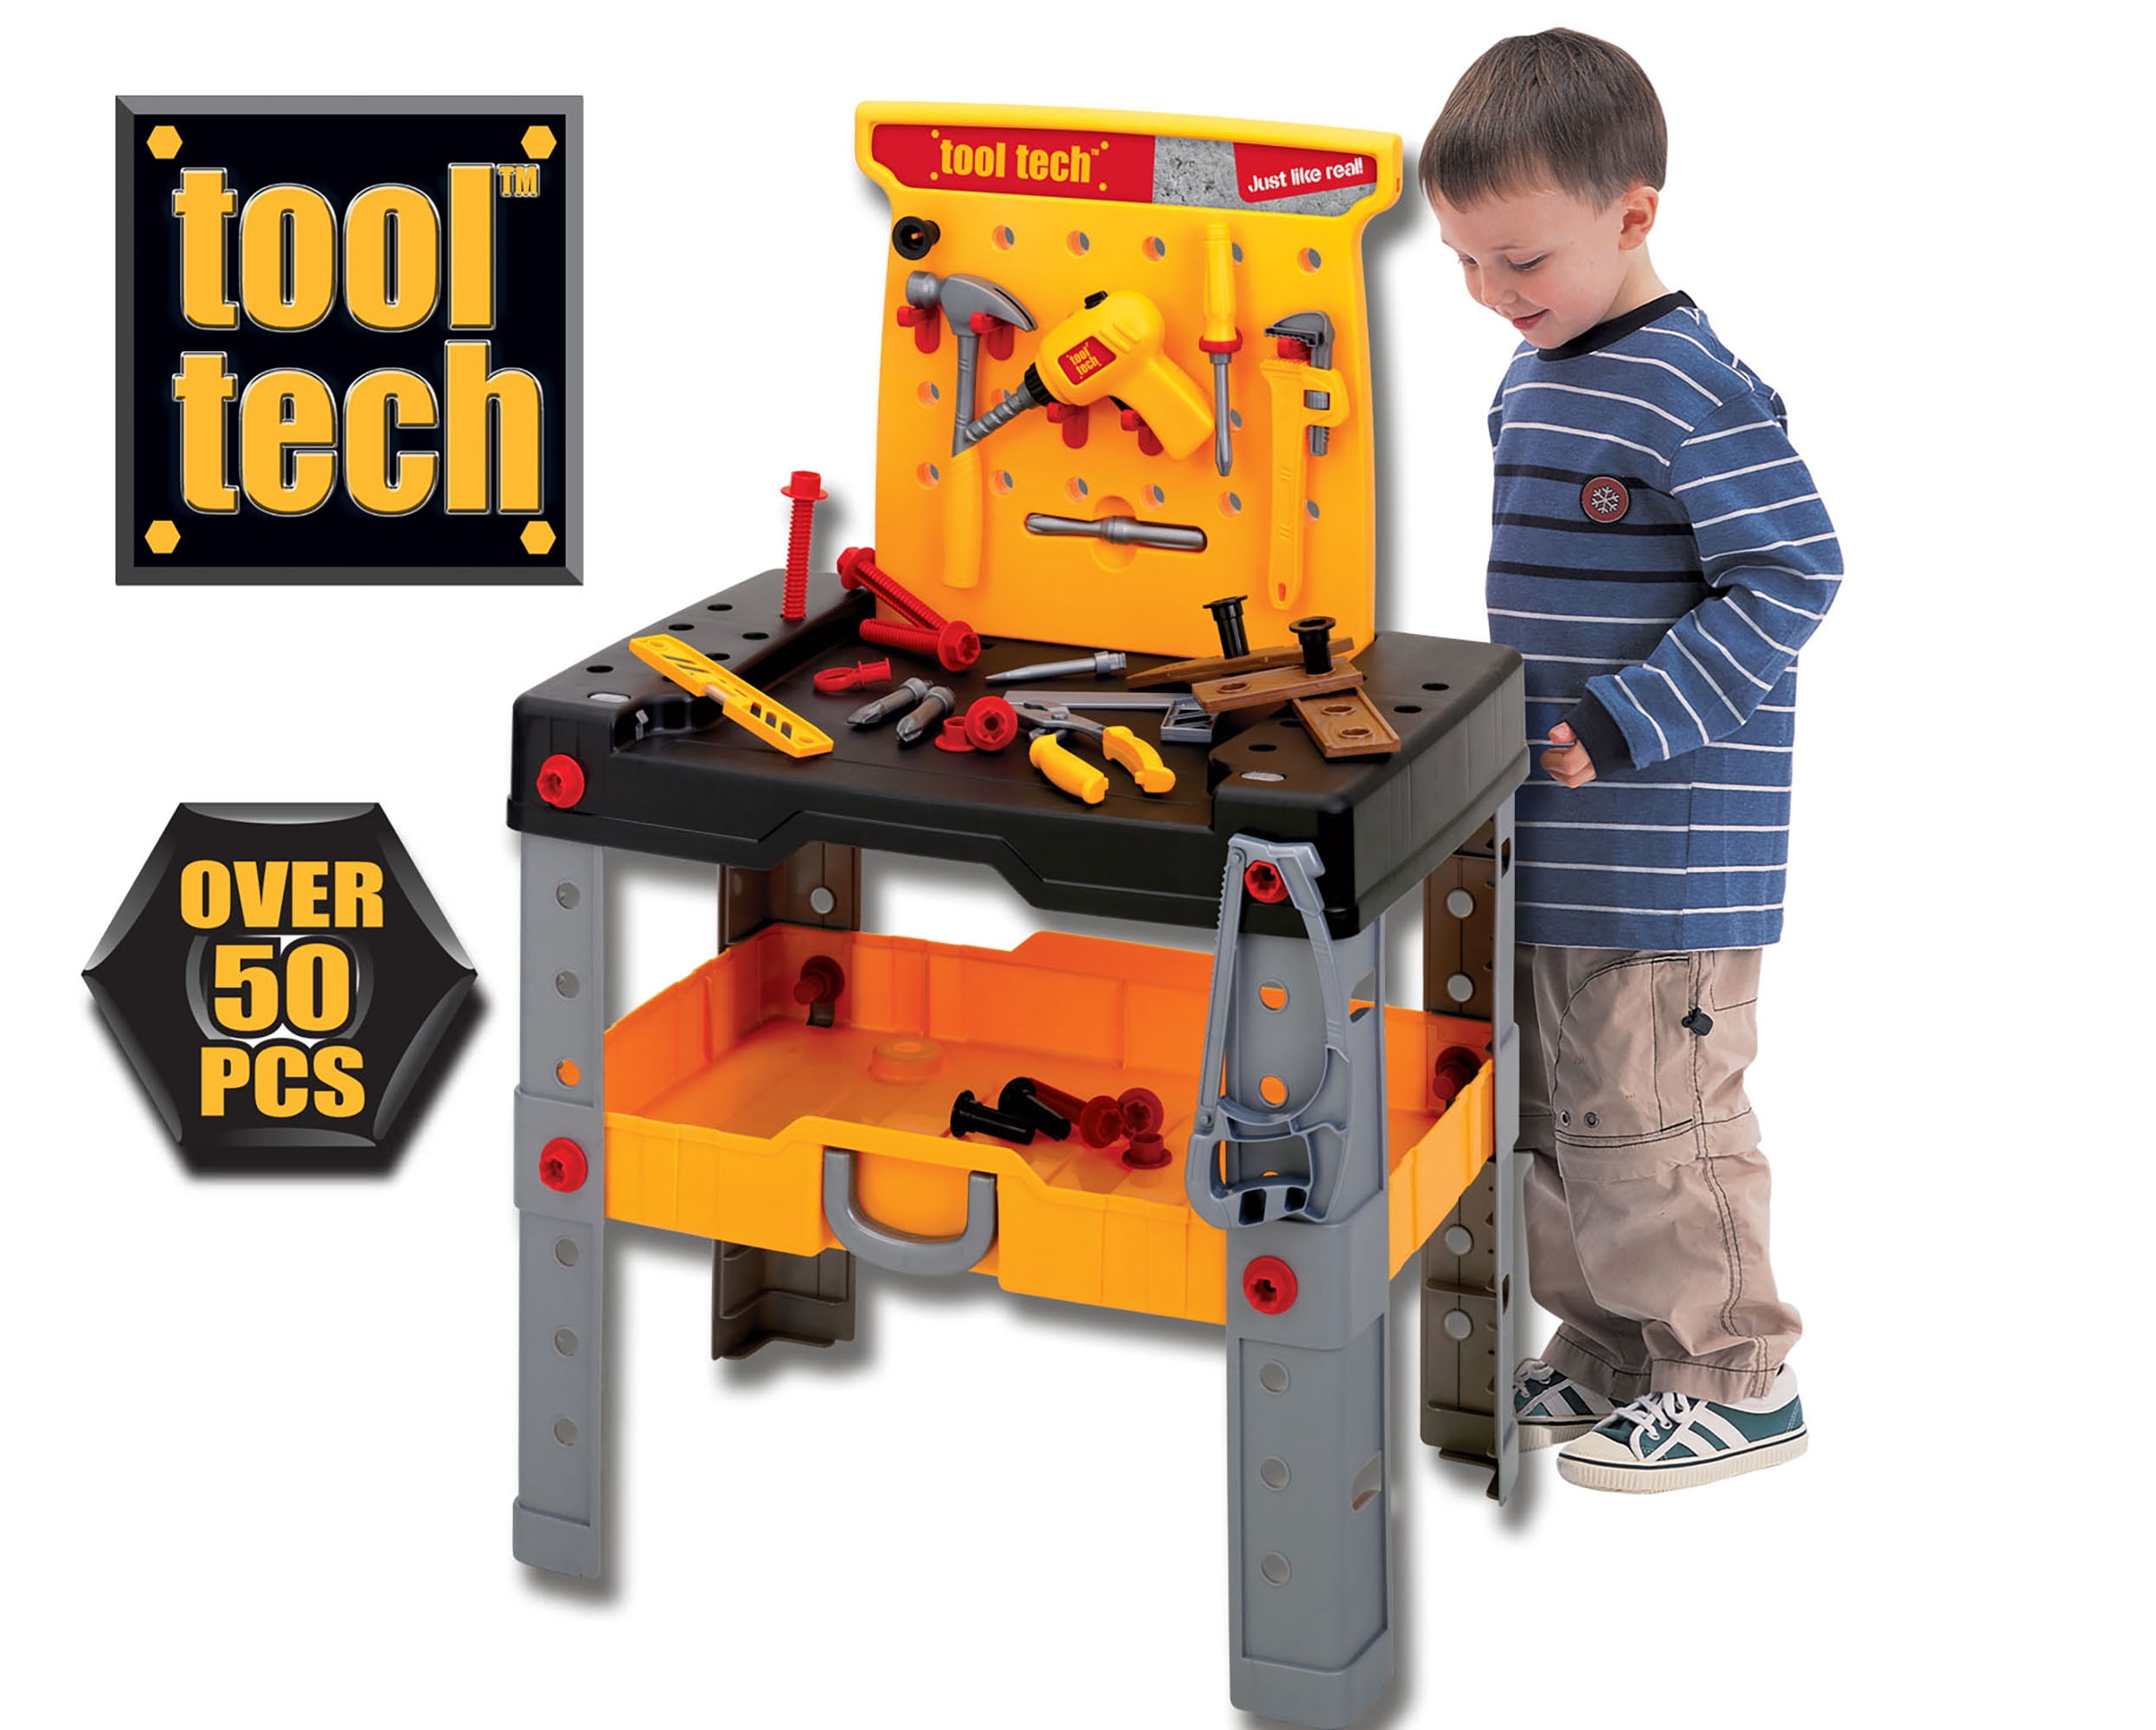  Smoby Black and Decker Kids Centre Workbench Pretend Play Toy  Workbench with Tools : Video Games